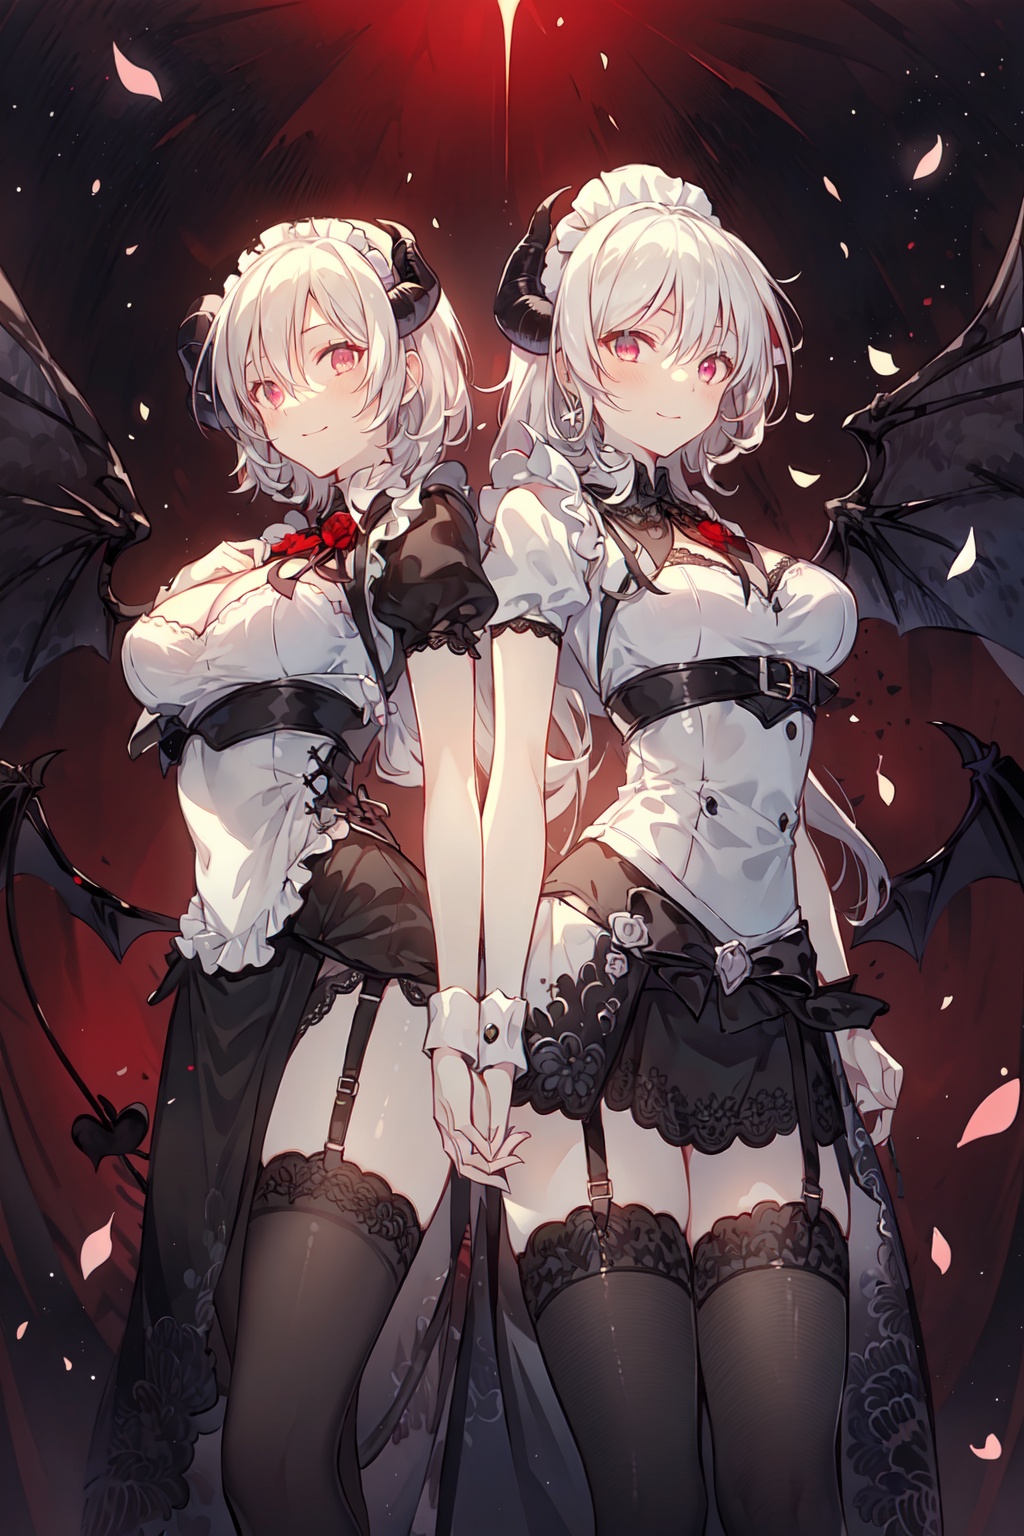 2girls\( two side, 
(1girl and (long_hair:1.2) and (black and red lace-trimmed bra, black_armor, armored_dress:1.2)), (1girl and (short_hair:1.2) and (maid_costume, maid_uniform, maid_dress:1.2))
\)
(high resolution, 8k, incredible quality, best quality, ultra-detailed, highly detailed, masterpiece:1.2), illustration, PIXIV, 
demon_girl, succubus, (beautiful face, beautiful detail face, cute and delicate face, delicate face, perfect face, golden ratio, golden ratio face:1.1), (white_hair, hair between eyes:1.2), (red_eyes:1.3), (expressionless eyes, extreme detailed eyes, beautiful detailed eyes:1.2), (black silk stocking:1.3), (sexy lingerie, garter_belt, garter_straps:1.2), kneesocks, (demon_wings:1.3), (demon_horns:1.2), evil smile, perfect body, breasts, large breasts, cleavage, slender waistline, slim legs, (high detail skin, natural skin texture, real skin texture:1.1), dancing, yuzu, full body, 
dark fantasy art, starry sky, beautiful detailed sky, flowers (innocent grey), flower_petals,  flying_petals, Bloodstain, Exquisite Flame, burning,